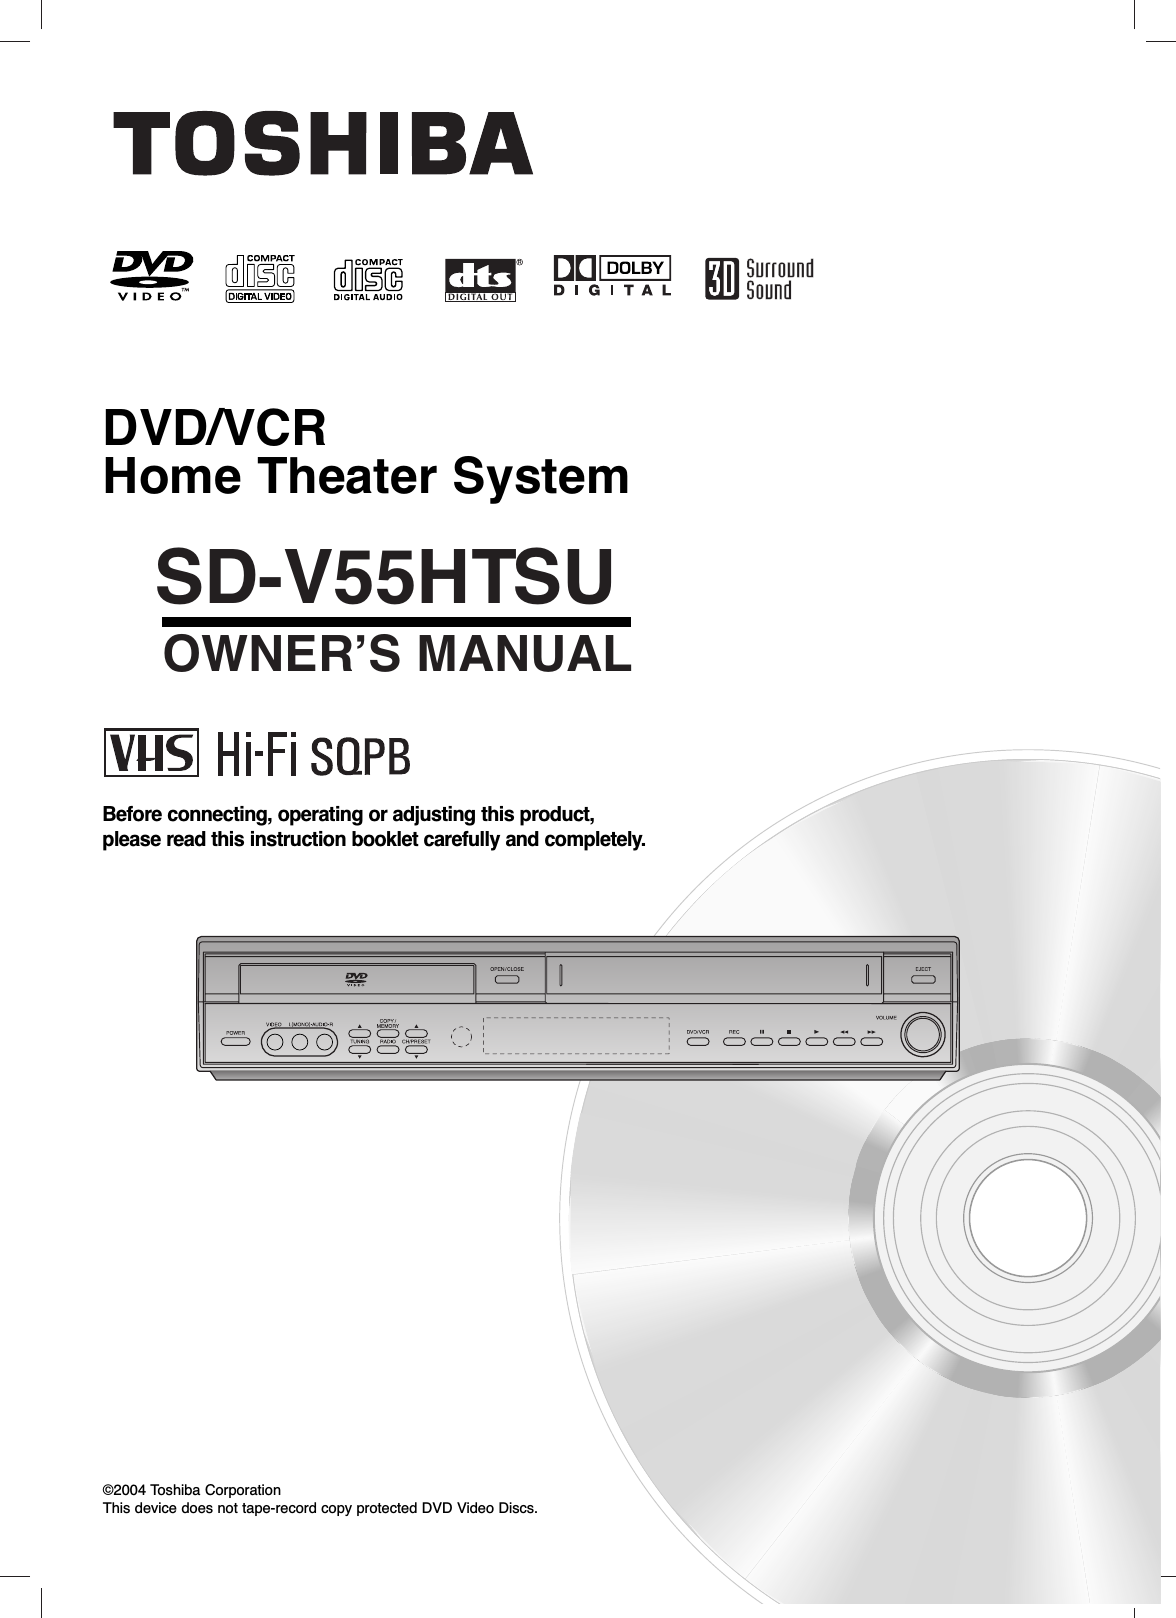 SD-V55HTSUOWNER’S MANUALDVD/VCR Home Theater SystemBefore connecting, operating or adjusting this product,please read this instruction booklet carefully and completely.©2004 Toshiba CorporationThis device does not tape-record copy protected DVD Video Discs.